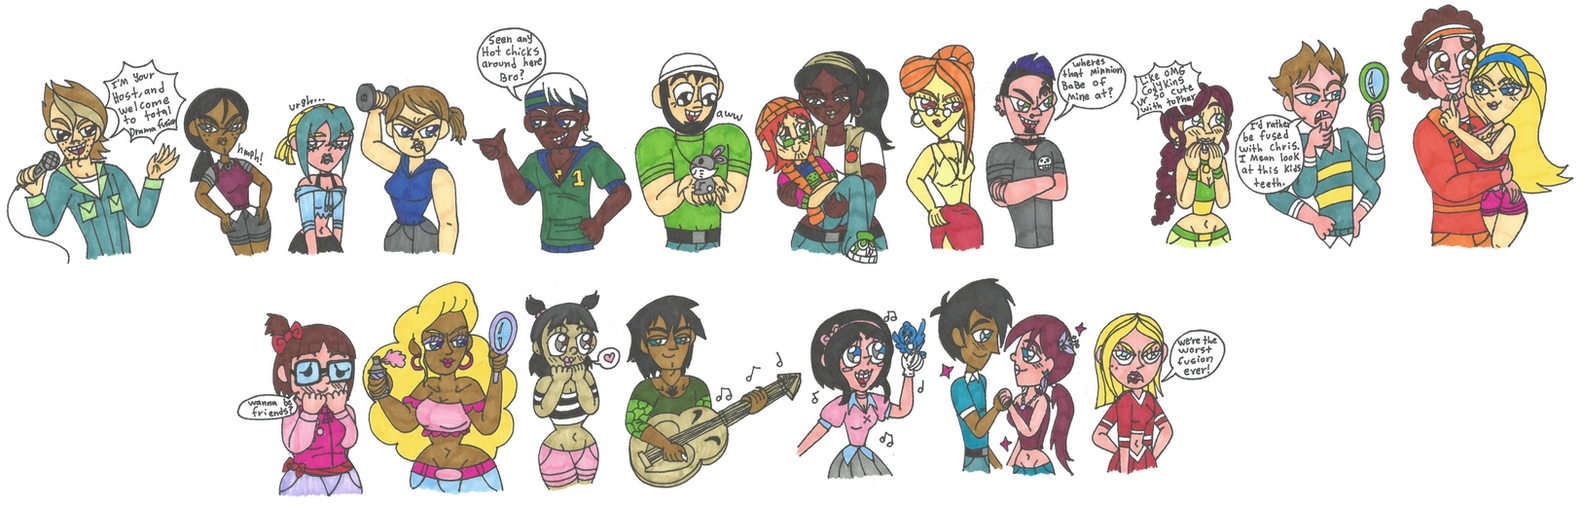 Request  Total Drama Fusion by Abrigedfoamy on DeviantArt